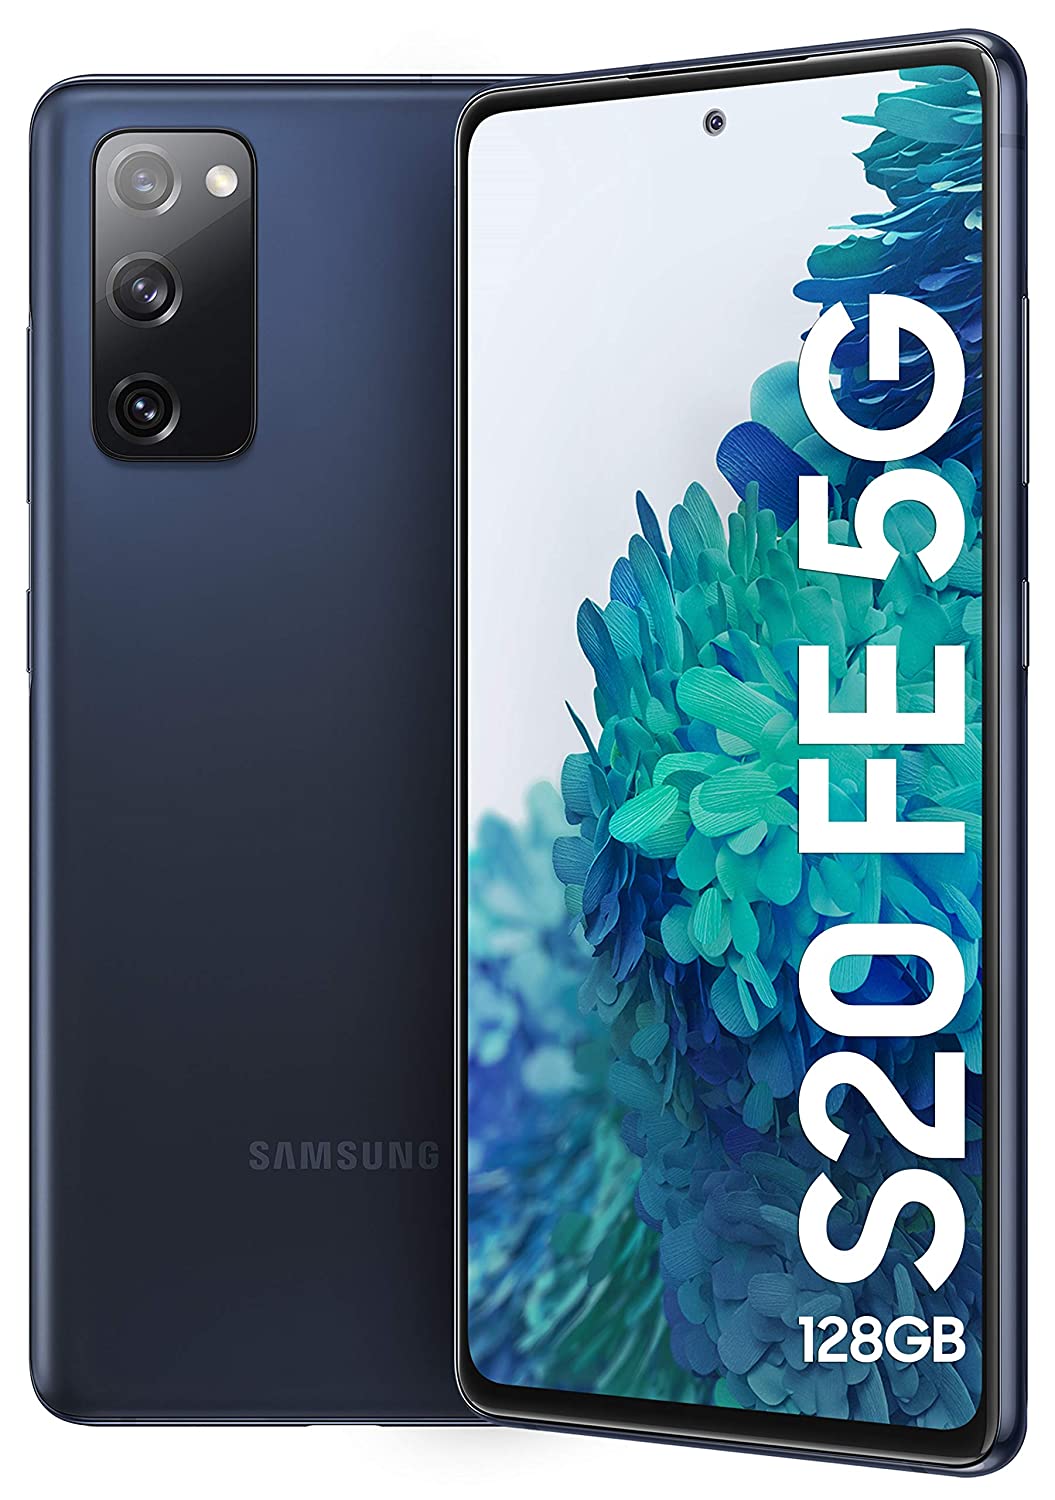 GREAT REPUBLIC DAY SALE | Buy Samsung Galaxy S20 FE 5G (Cloud Navy, 8GB RAM, 128GB Storage) with No Cost EMI & Additional Exchange Offers + Apply Rs.2,000 Coupon